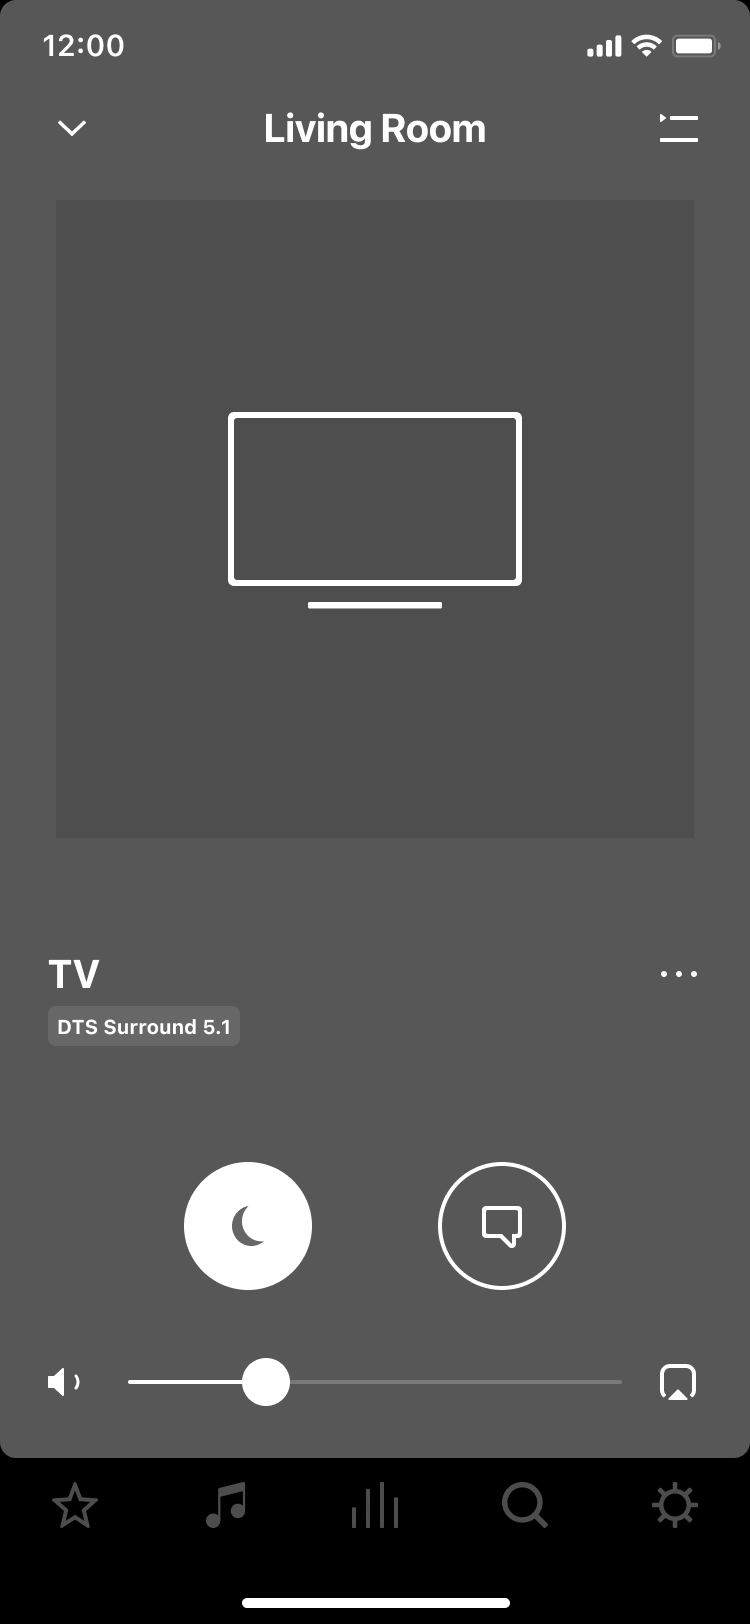 The DTS icon appears on the Sonos app if streaming content is present